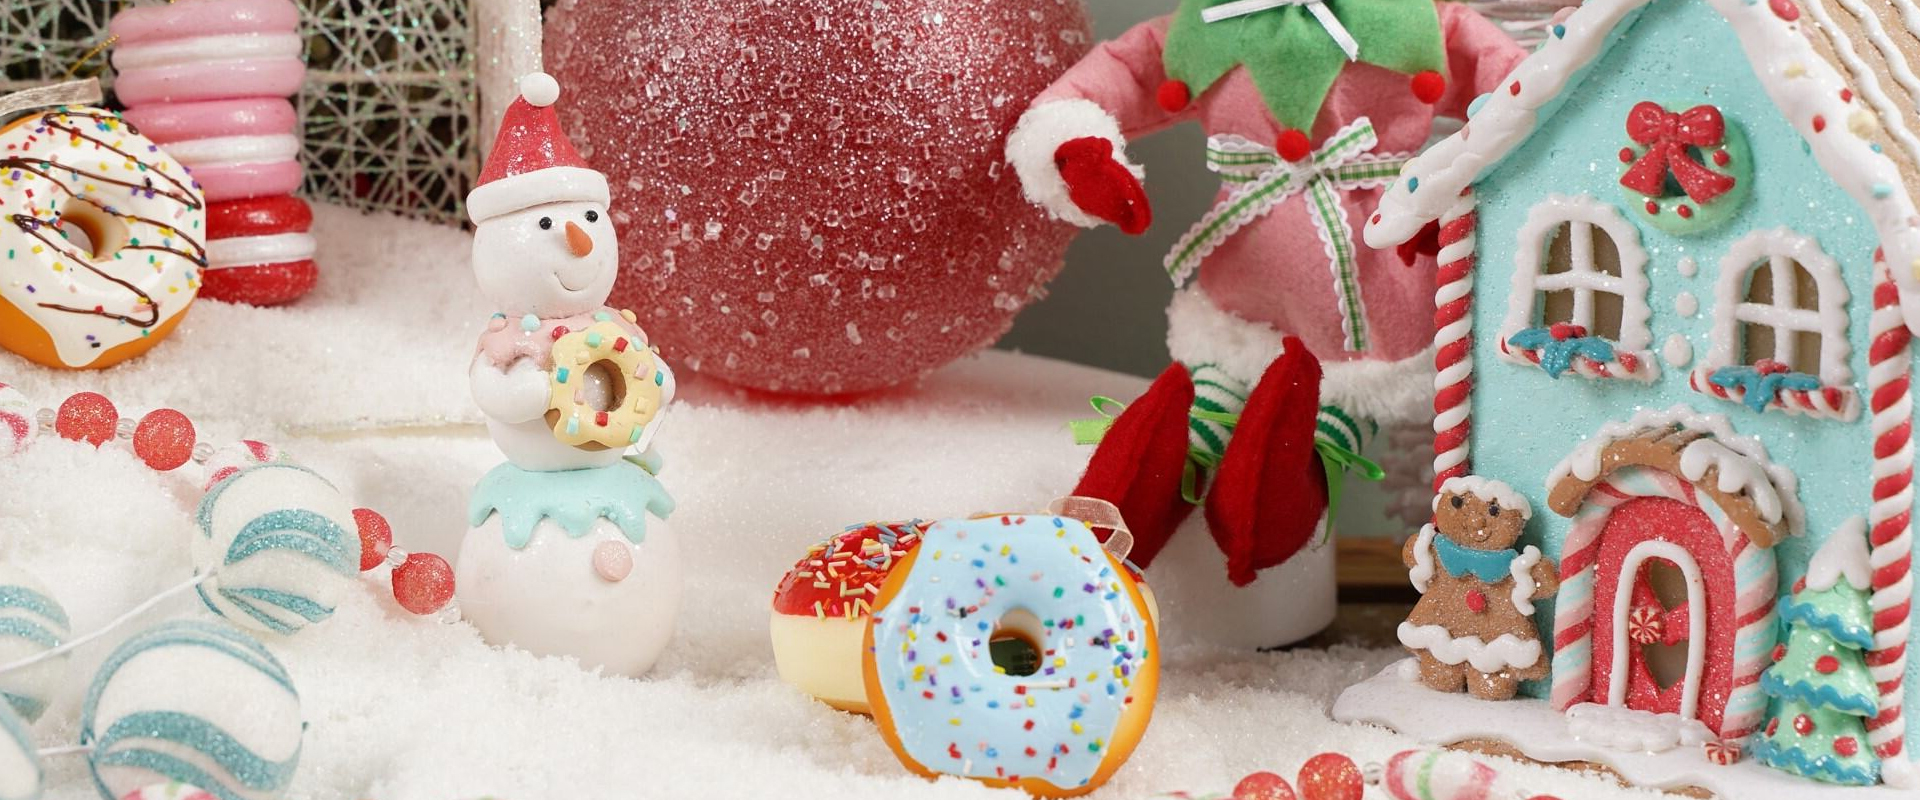 Pastel Gingerbread and Candy Cane Ornaments